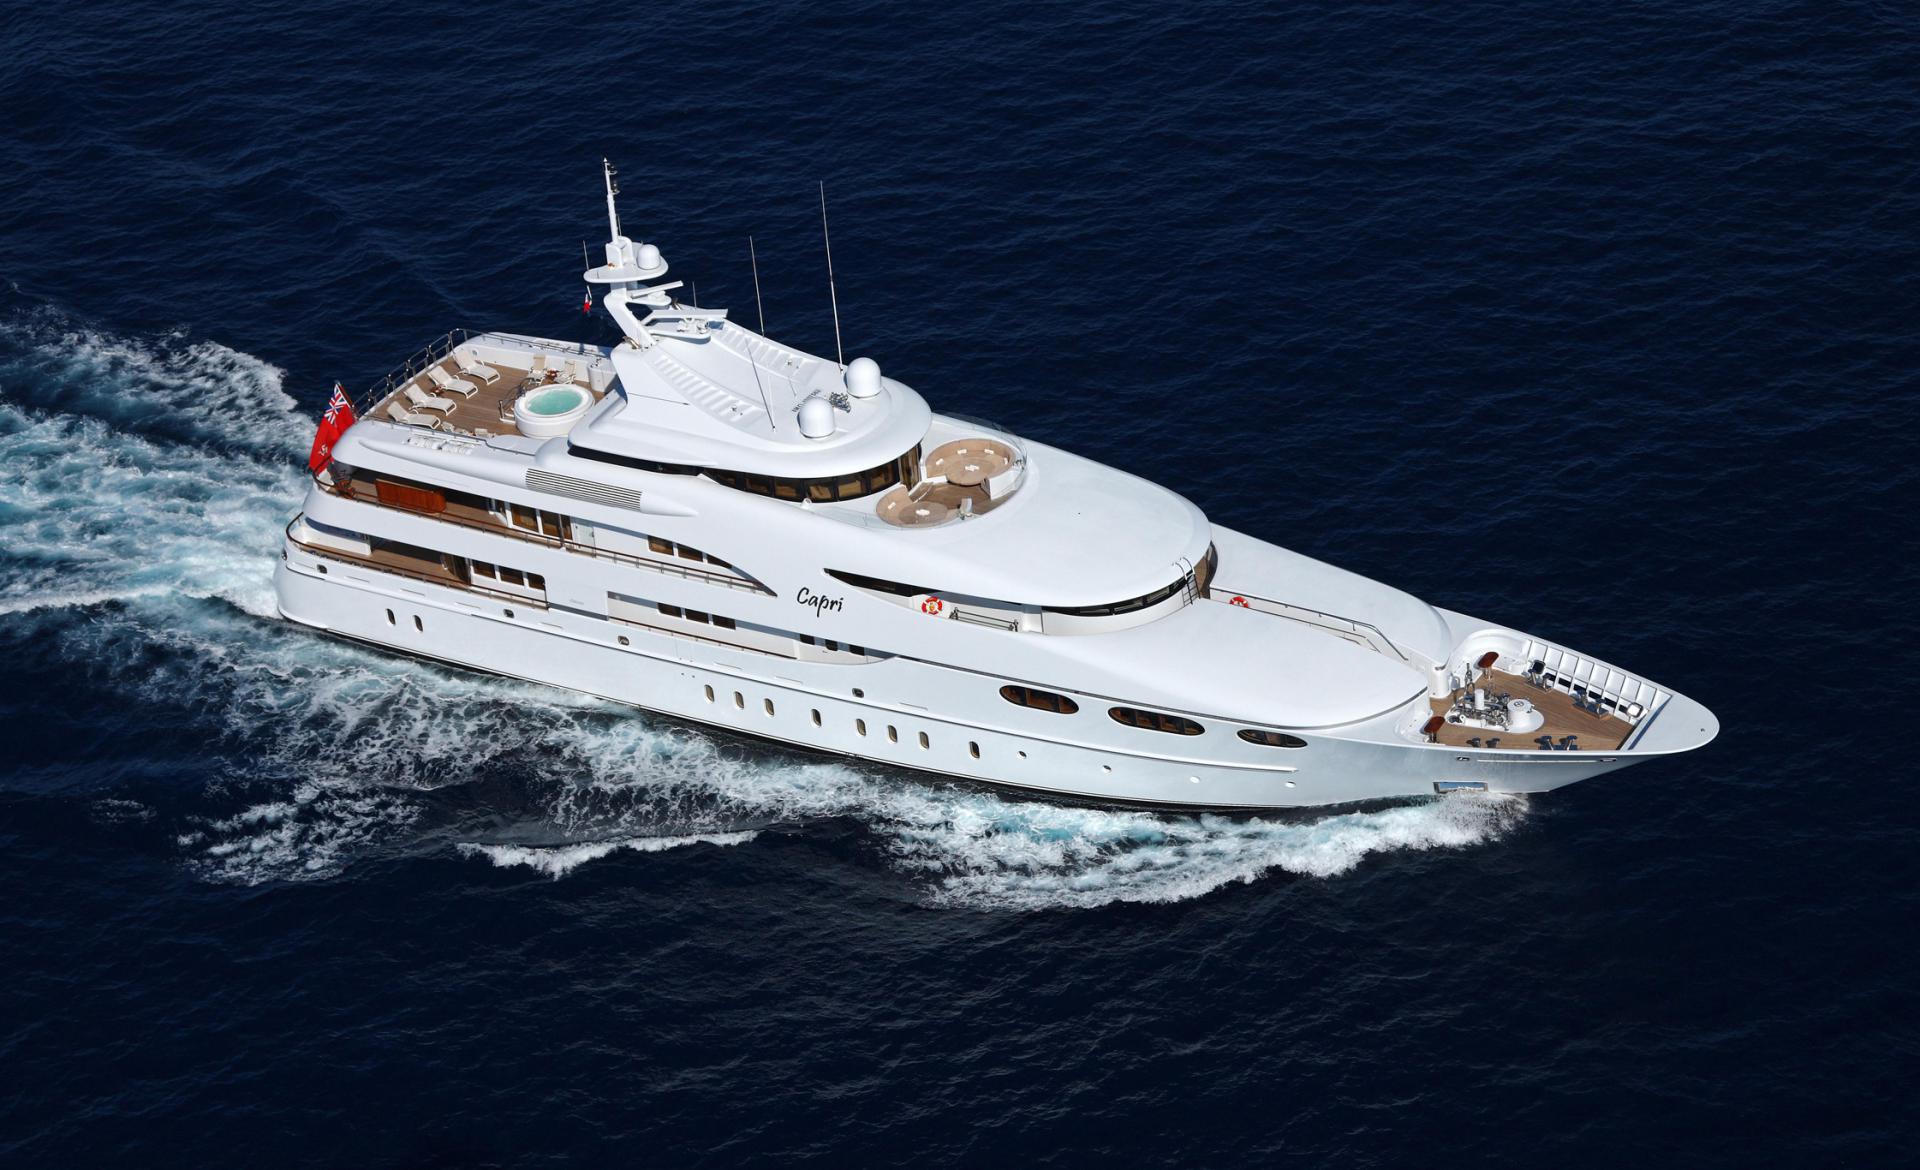 Yacht CAPRI By Lurssen - From The Air